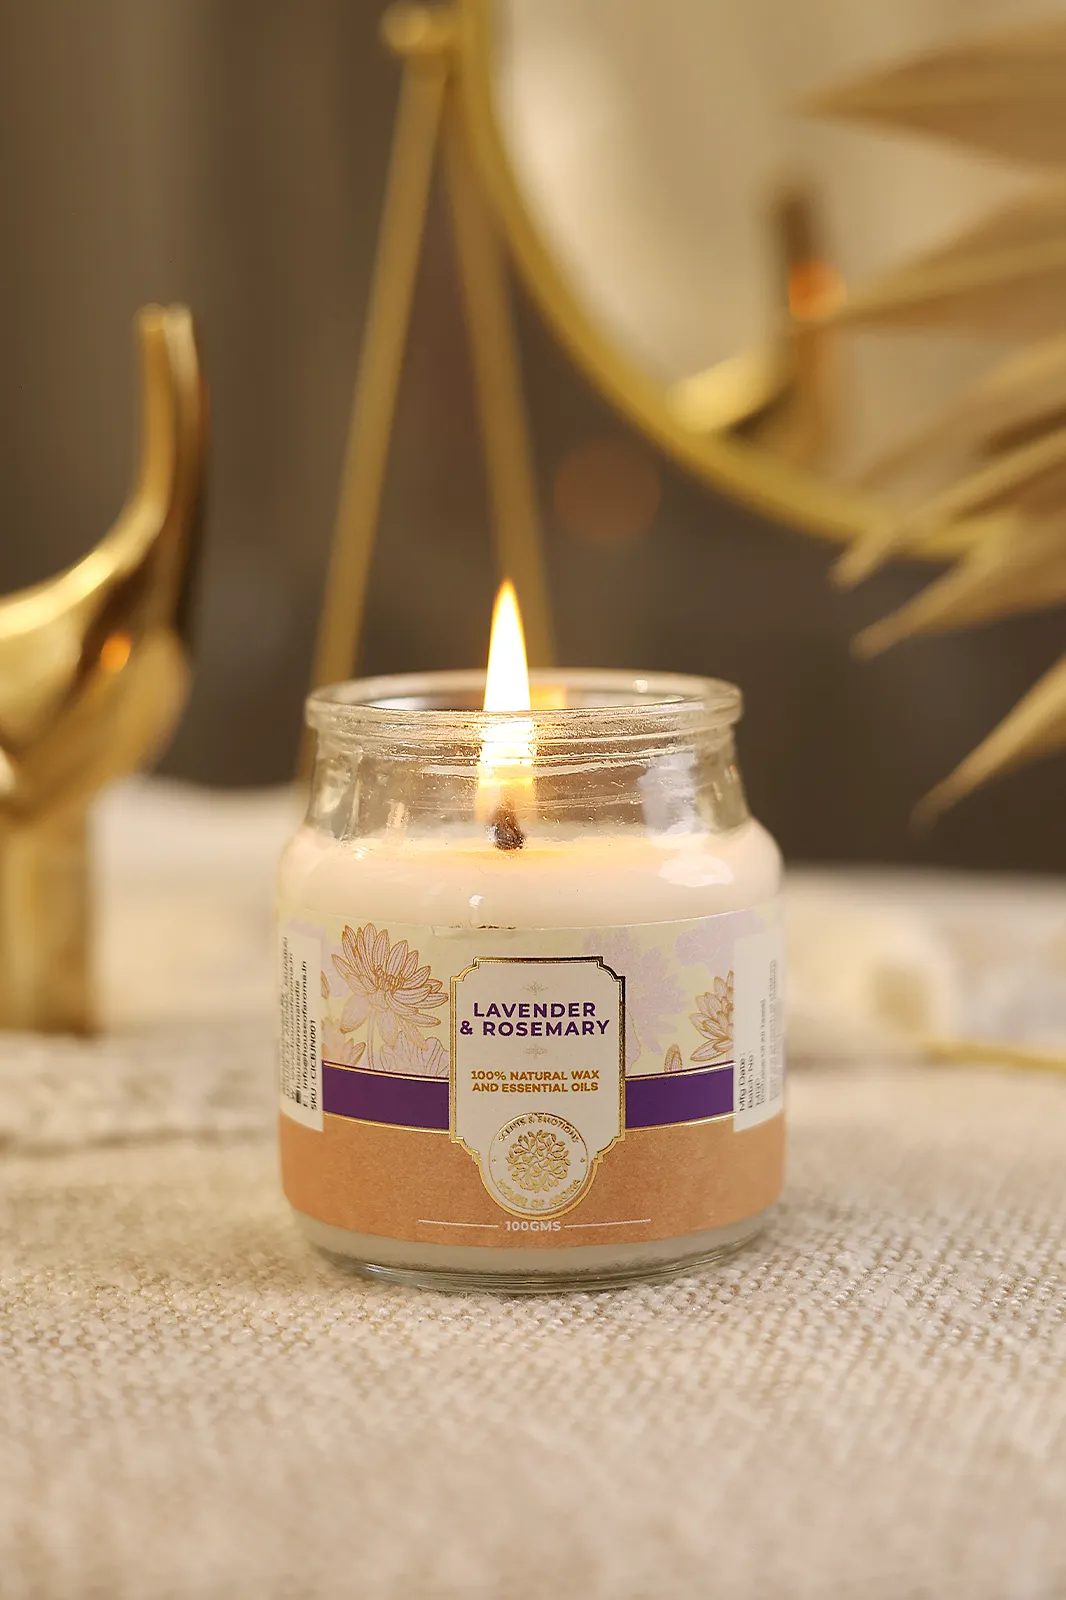 Lavender and Rosemary Natural Scented Candle, Rosemary natural scented candles, Lavender natural scented candles, best luxury fresh candle, candles online, HOA